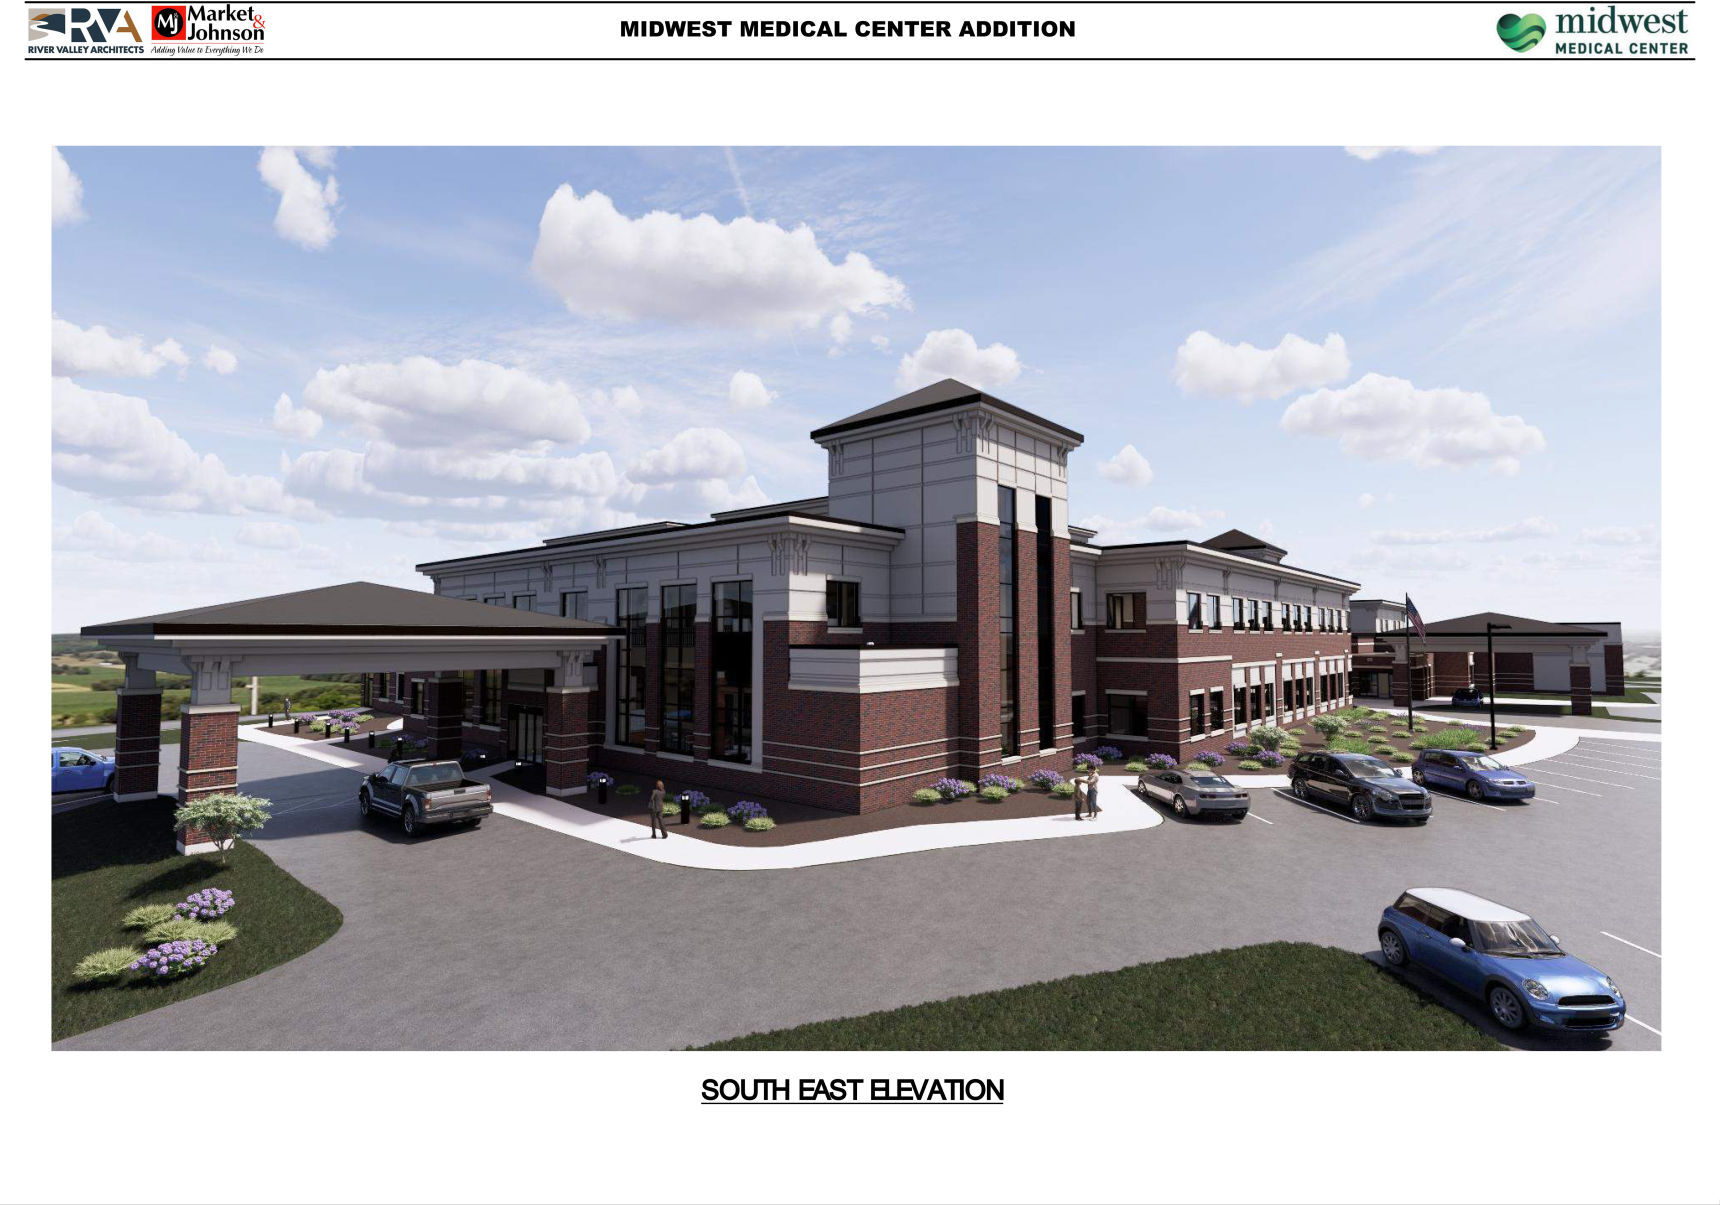 Rendering illustrates the planned expansion of Midwest Medical Center in Galena, Ill.    PHOTO CREDIT: Contributed